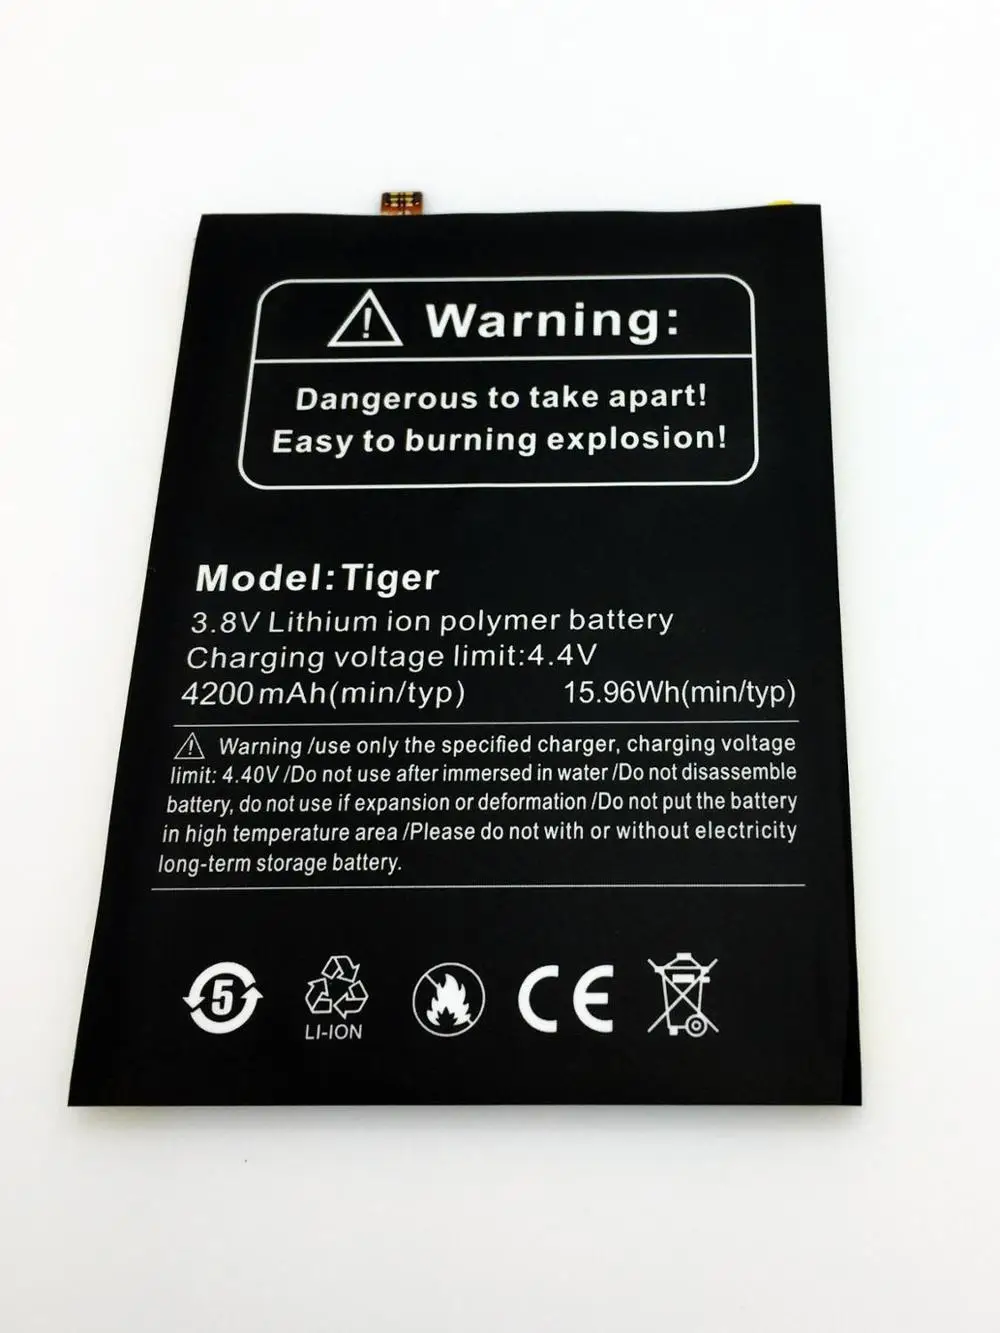 

Ulefone Tiger Battery 4200mah 3.8V for Ulefone Tiger Mobile Phone 5.5" HD MTK6737 Quad Core Android 6.0 + Free Tools